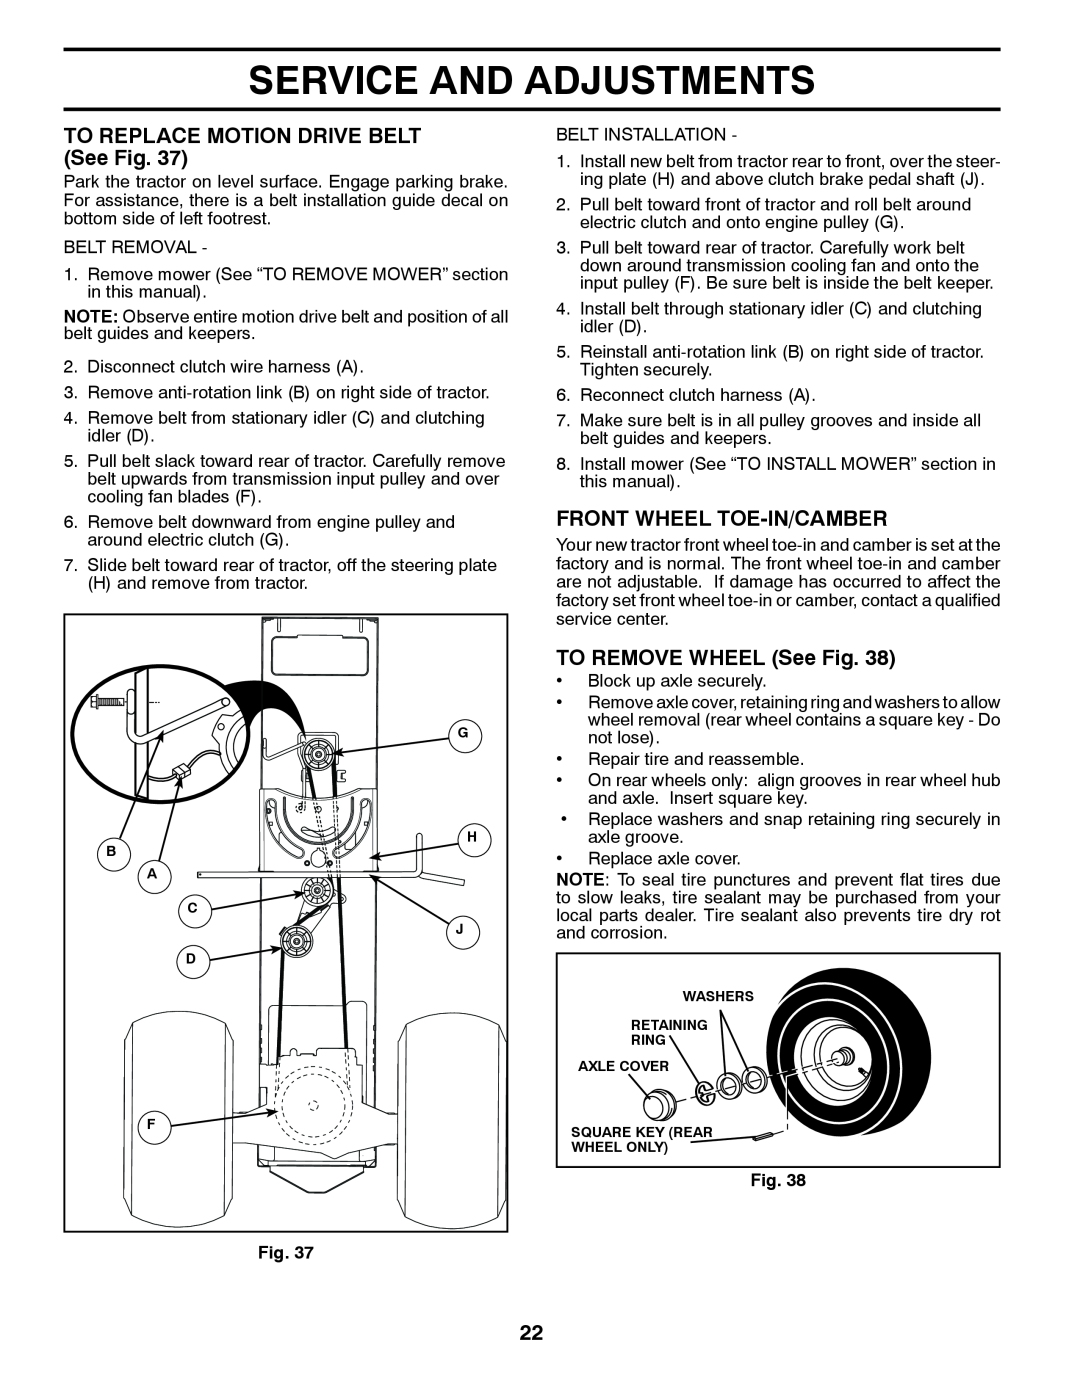 Husqvarna GTH26V52LS owner manual TO REPLACE MOTION DRIVE BELT See Fig, Front Wheel Toe-In/Camber, TO REMOVE WHEEL See Fig 